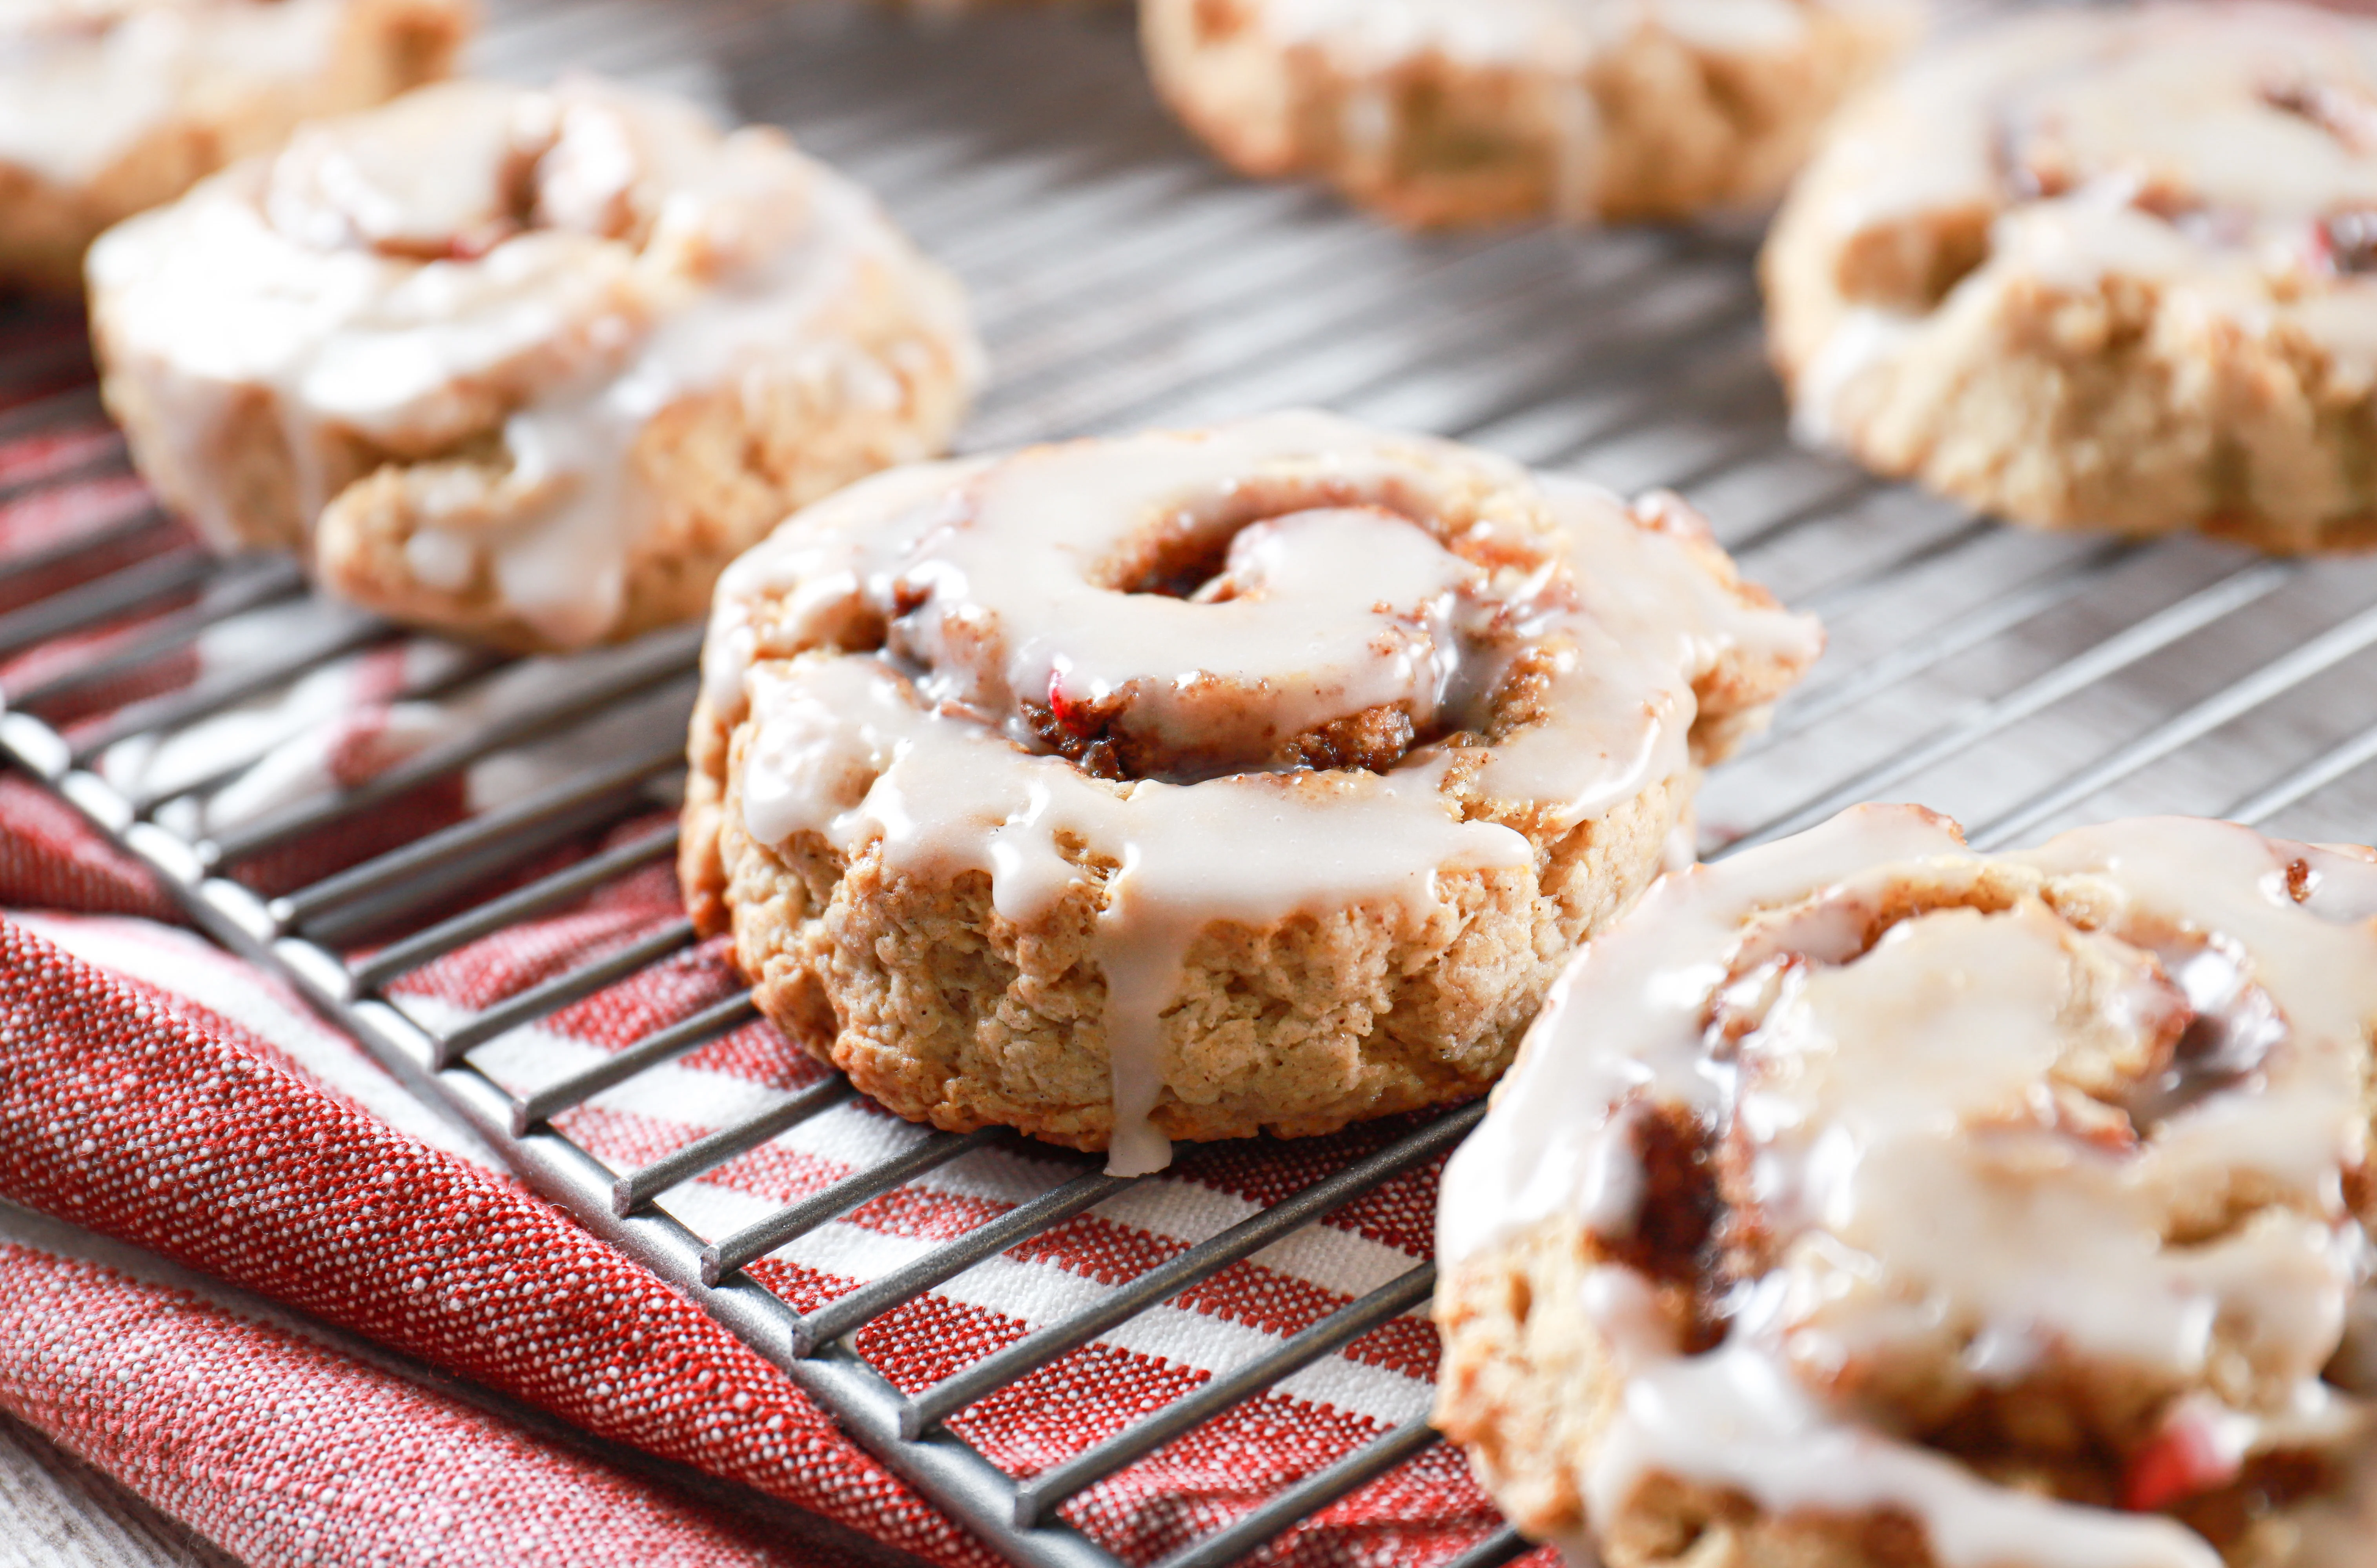 Side view of an apple cinnamon roll scone on a cooling rack